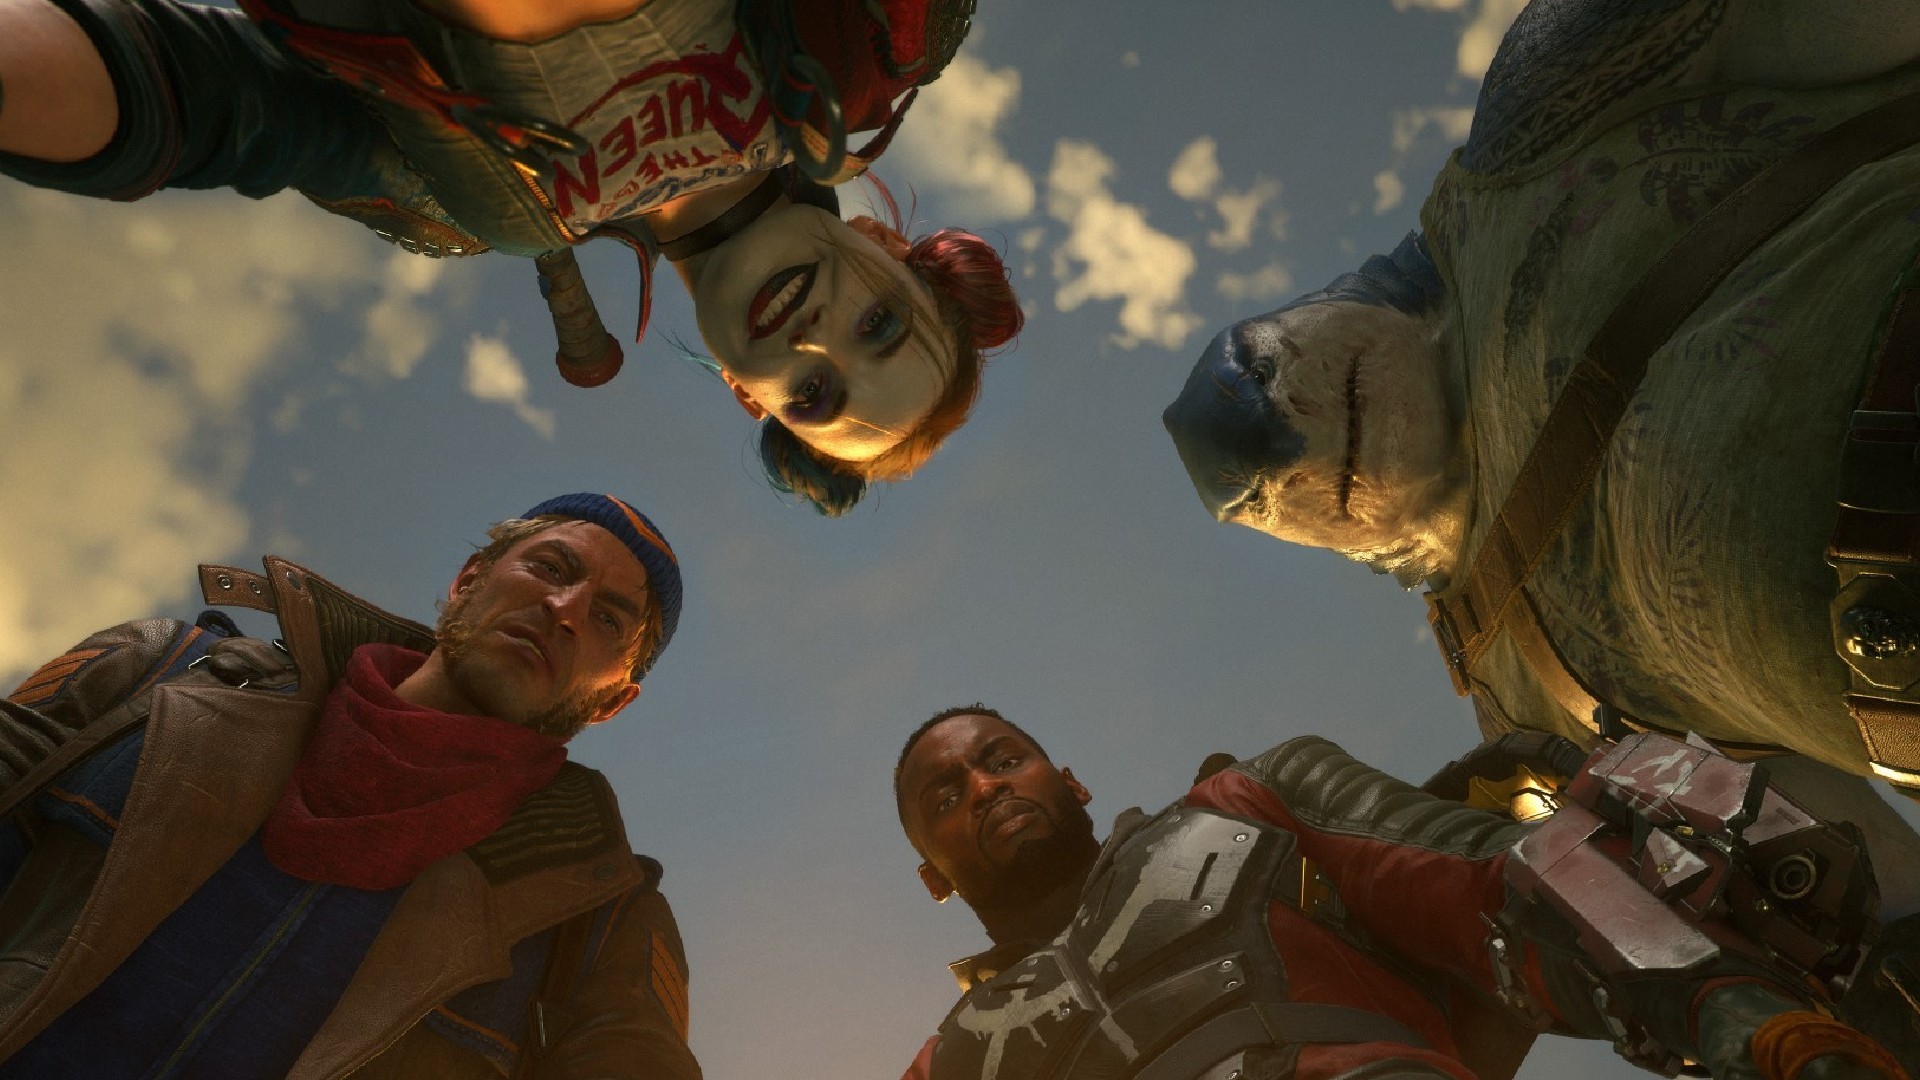 Suicide Squad: Kill the Justice League System Requirements - Can I